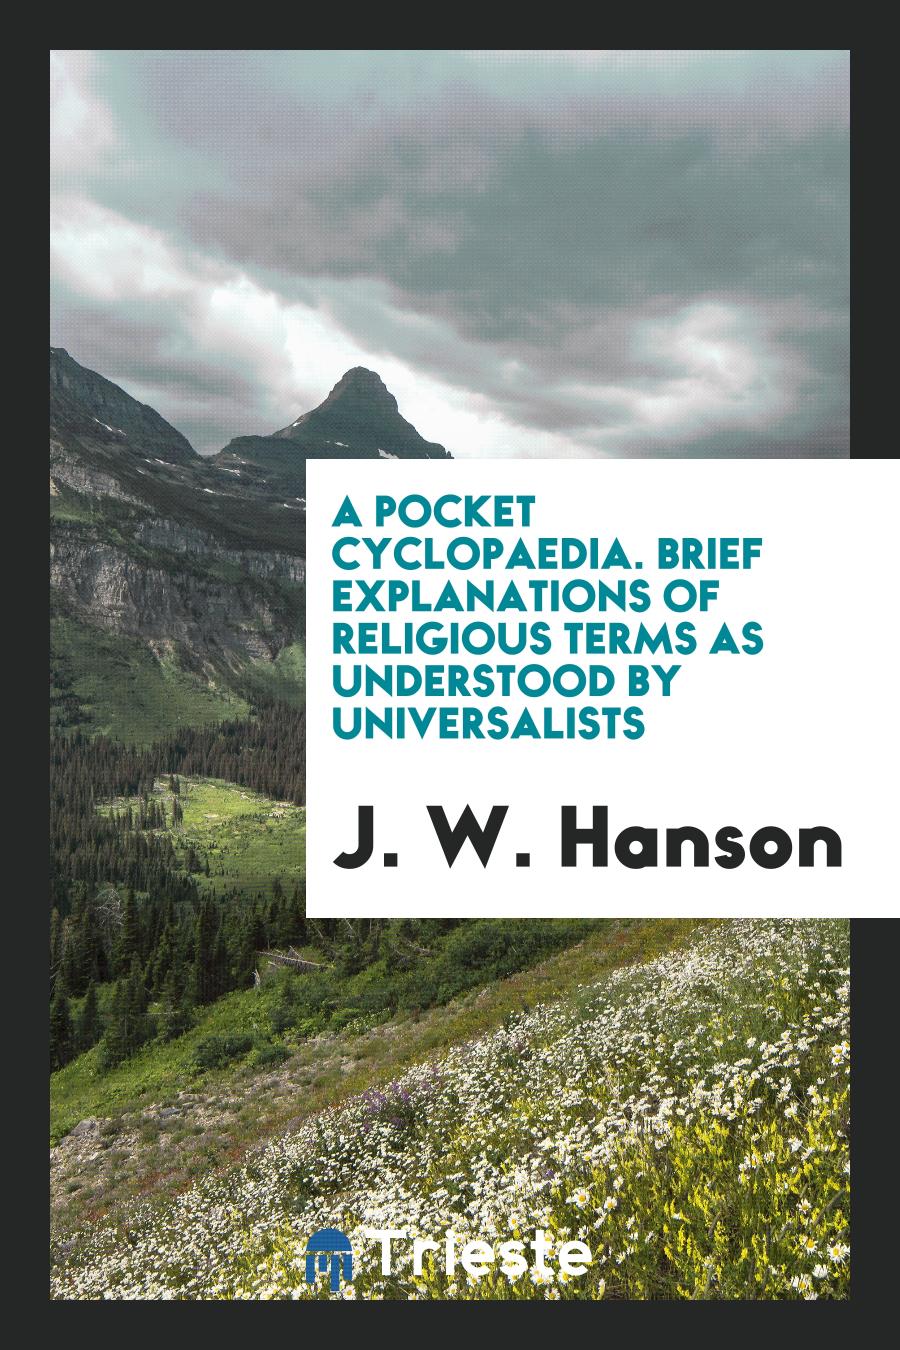 A Pocket Cyclopaedia. Brief Explanations of Religious Terms as Understood by Universalists